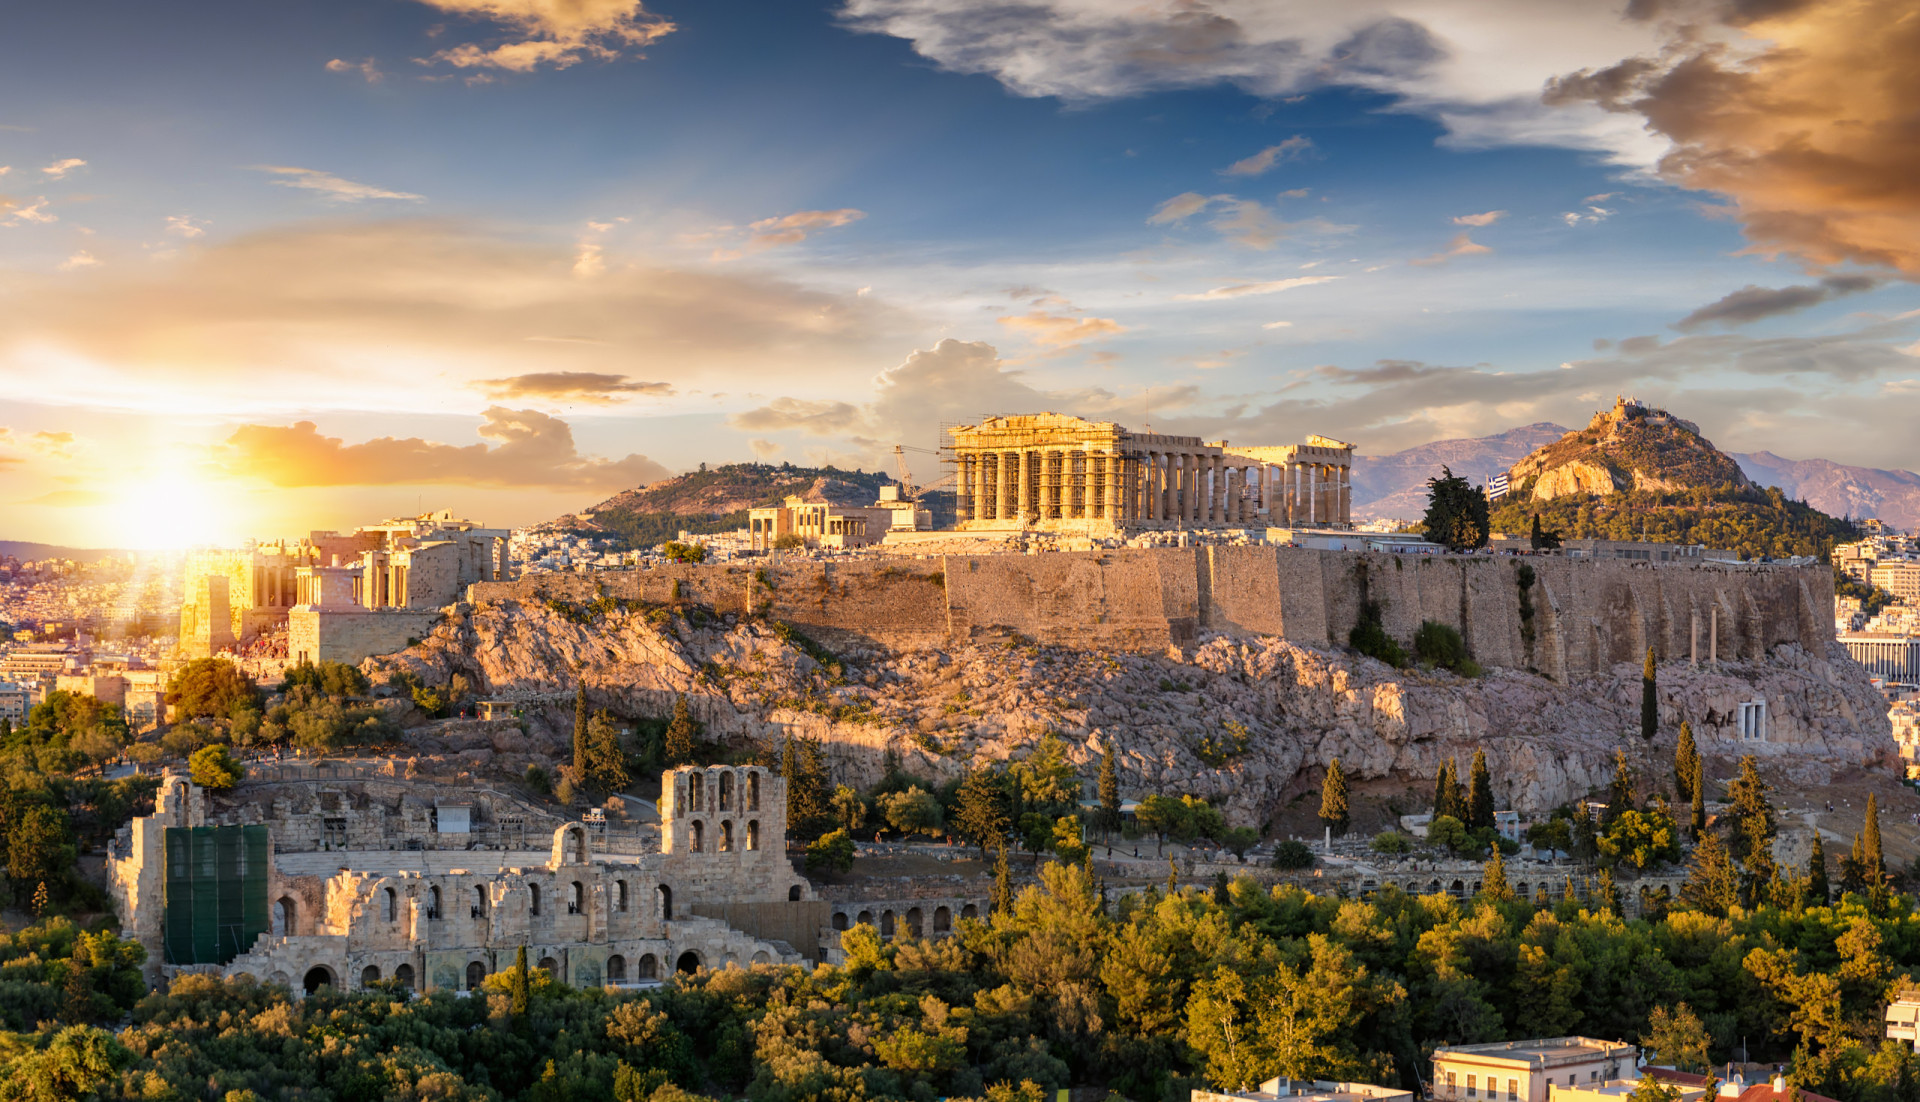 <p>This iconic symbol of ancient Greece is undergoing vital restoration efforts. Portions of the site will be closed to ensure long-term preservation of its historical structures, including the Parthenon, ensuring they endure for future generations to admire.</p><p><a href="https://www.msn.com/en-us/community/channel/vid-7xx8mnucu55yw63we9va2gwr7uihbxwc68fxqp25x6tg4ftibpra?cvid=94631541bc0f4f89bfd59158d696ad7e">Follow us and access great exclusive content every day</a></p>